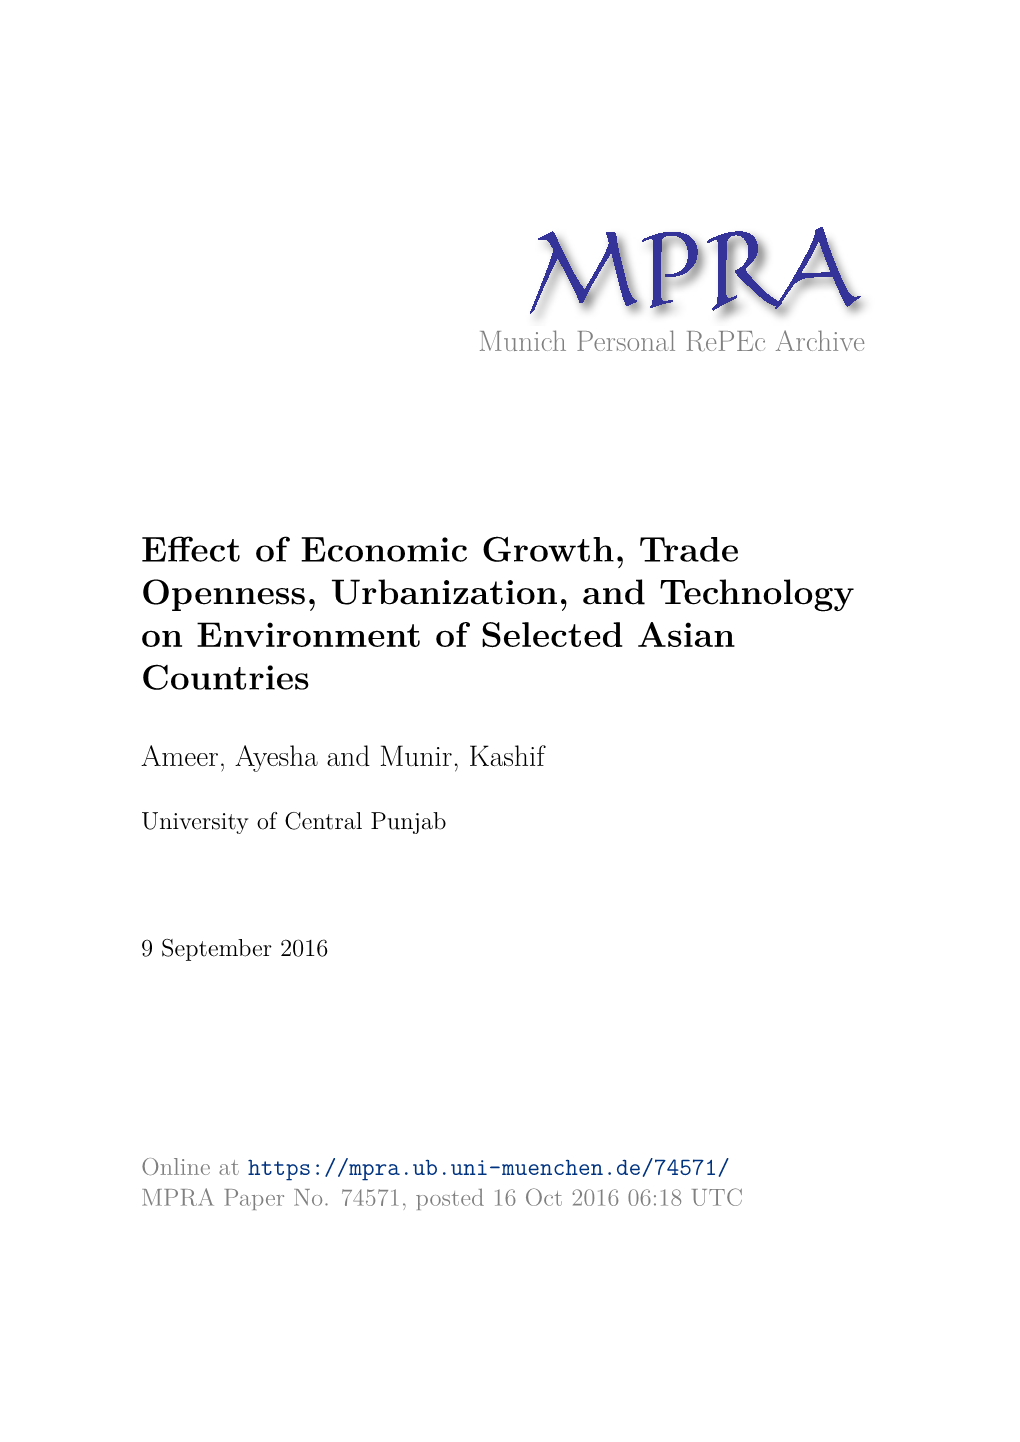 Effect of Economic Growth, Trade Openness, Urbanization, and Technology on Environment of Selected Asian Countries